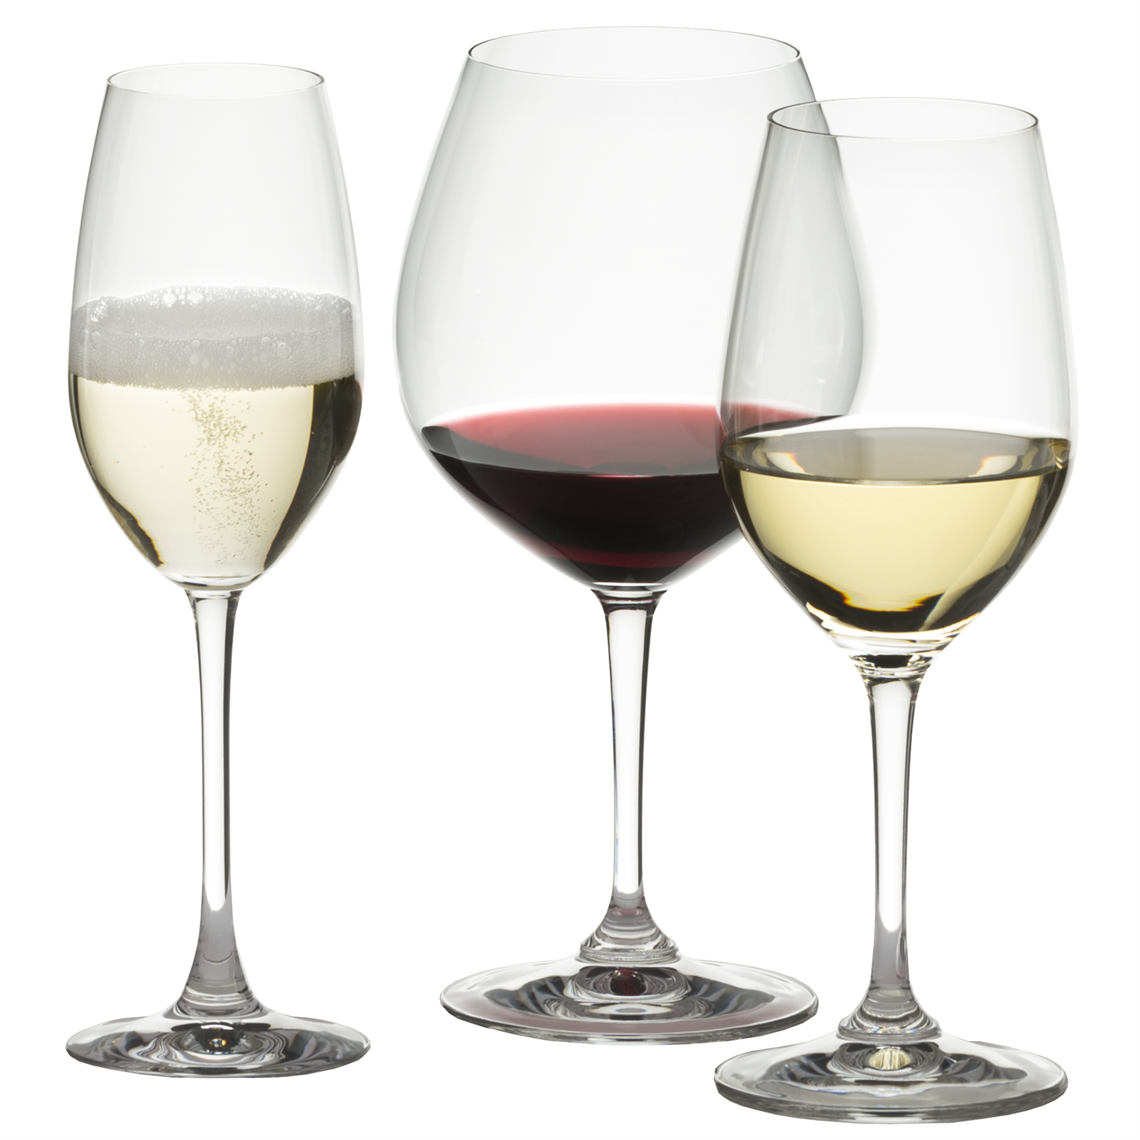 View more rioja wine glasses from our Restaurant & Trade Glasses range